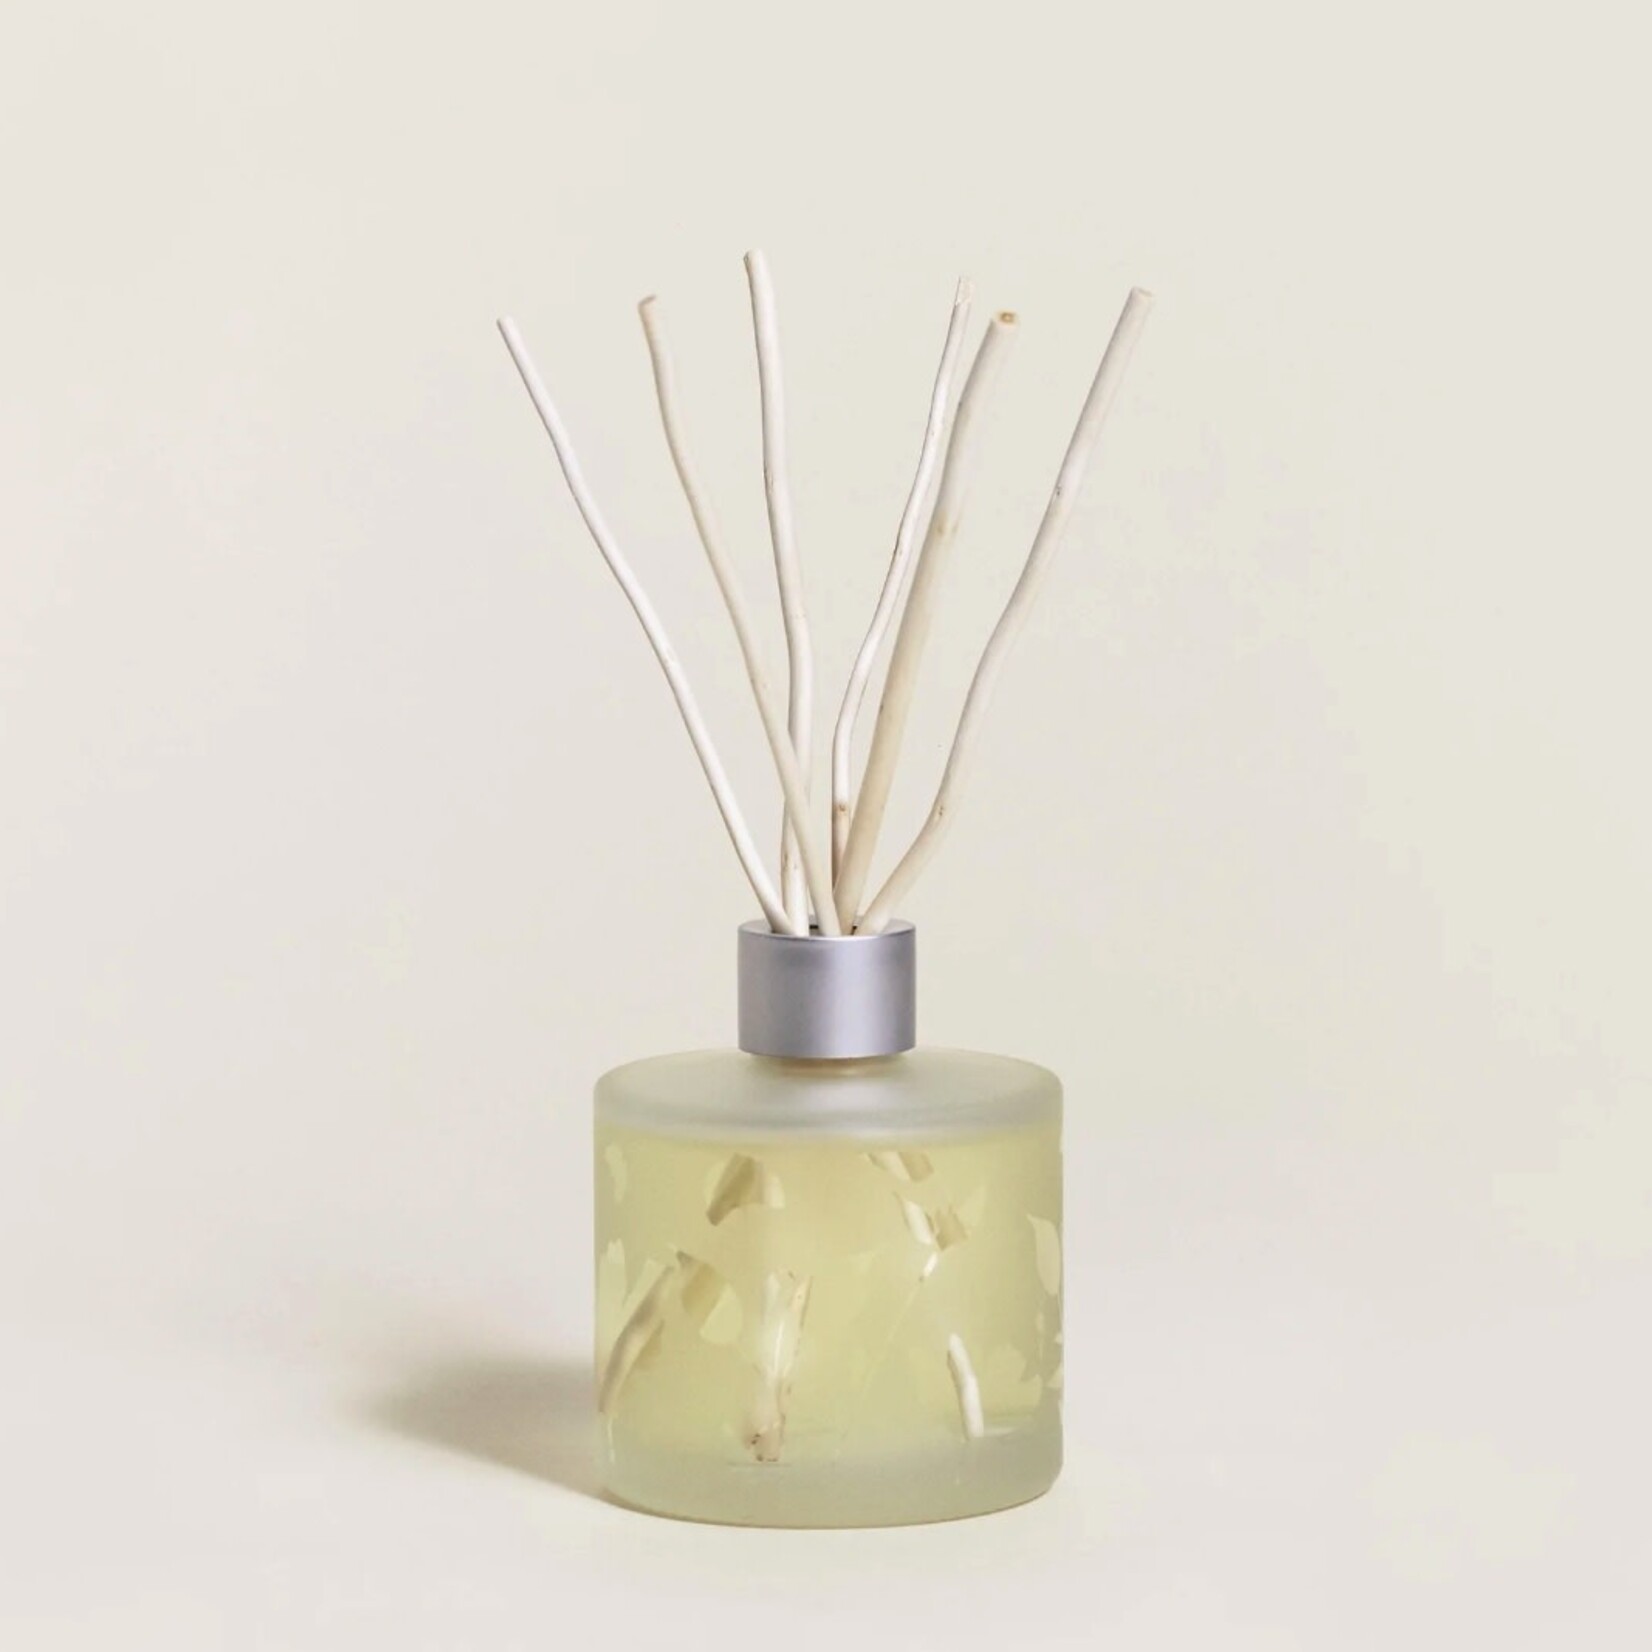 Maison Berger Paris Aroma Focus Pre-filled Reed Diffuser Aromatic Leaves